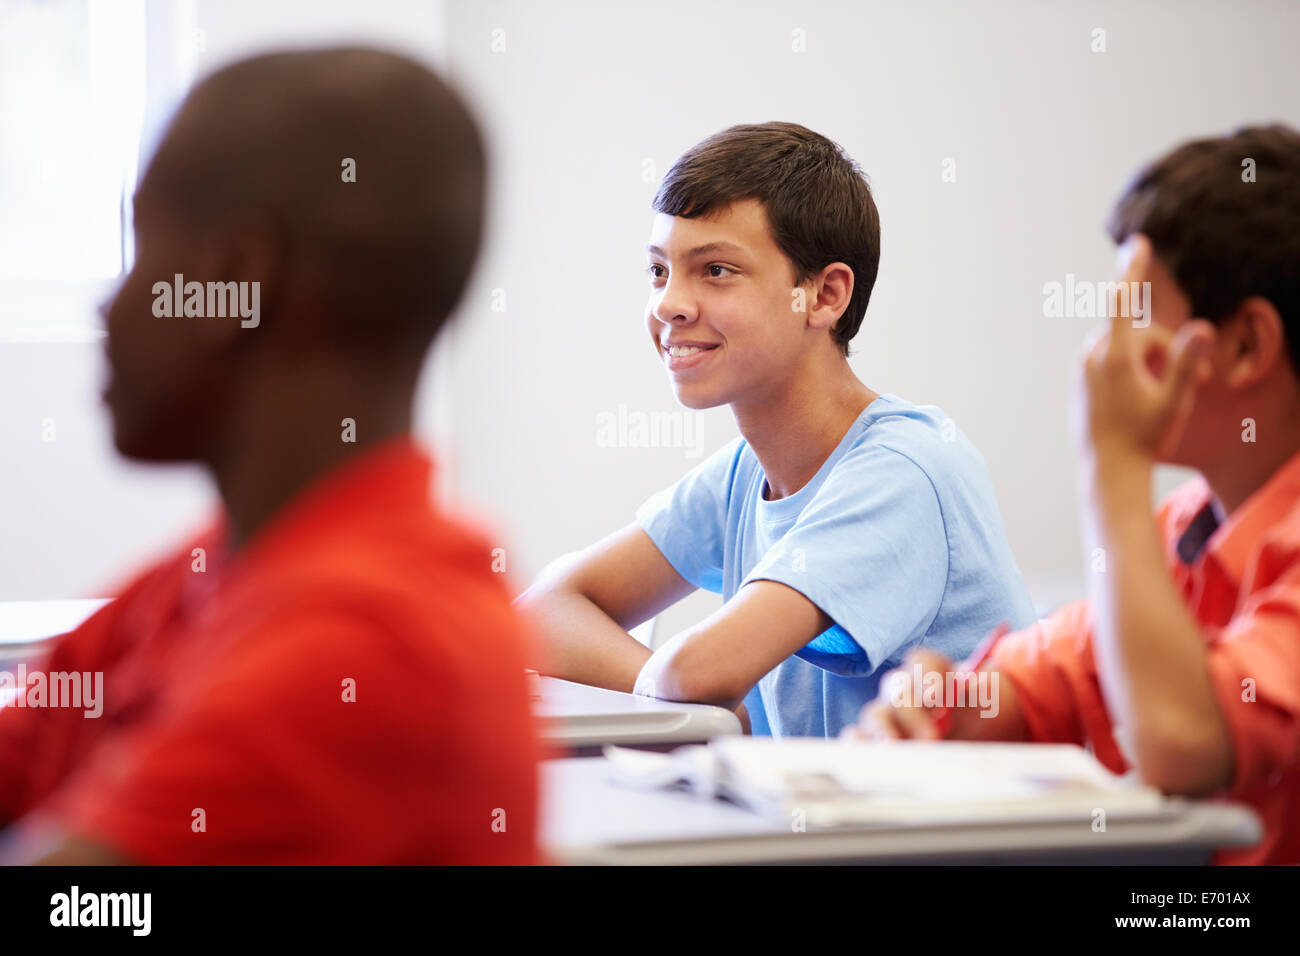 Male High School Pupil In Class Stock Photo